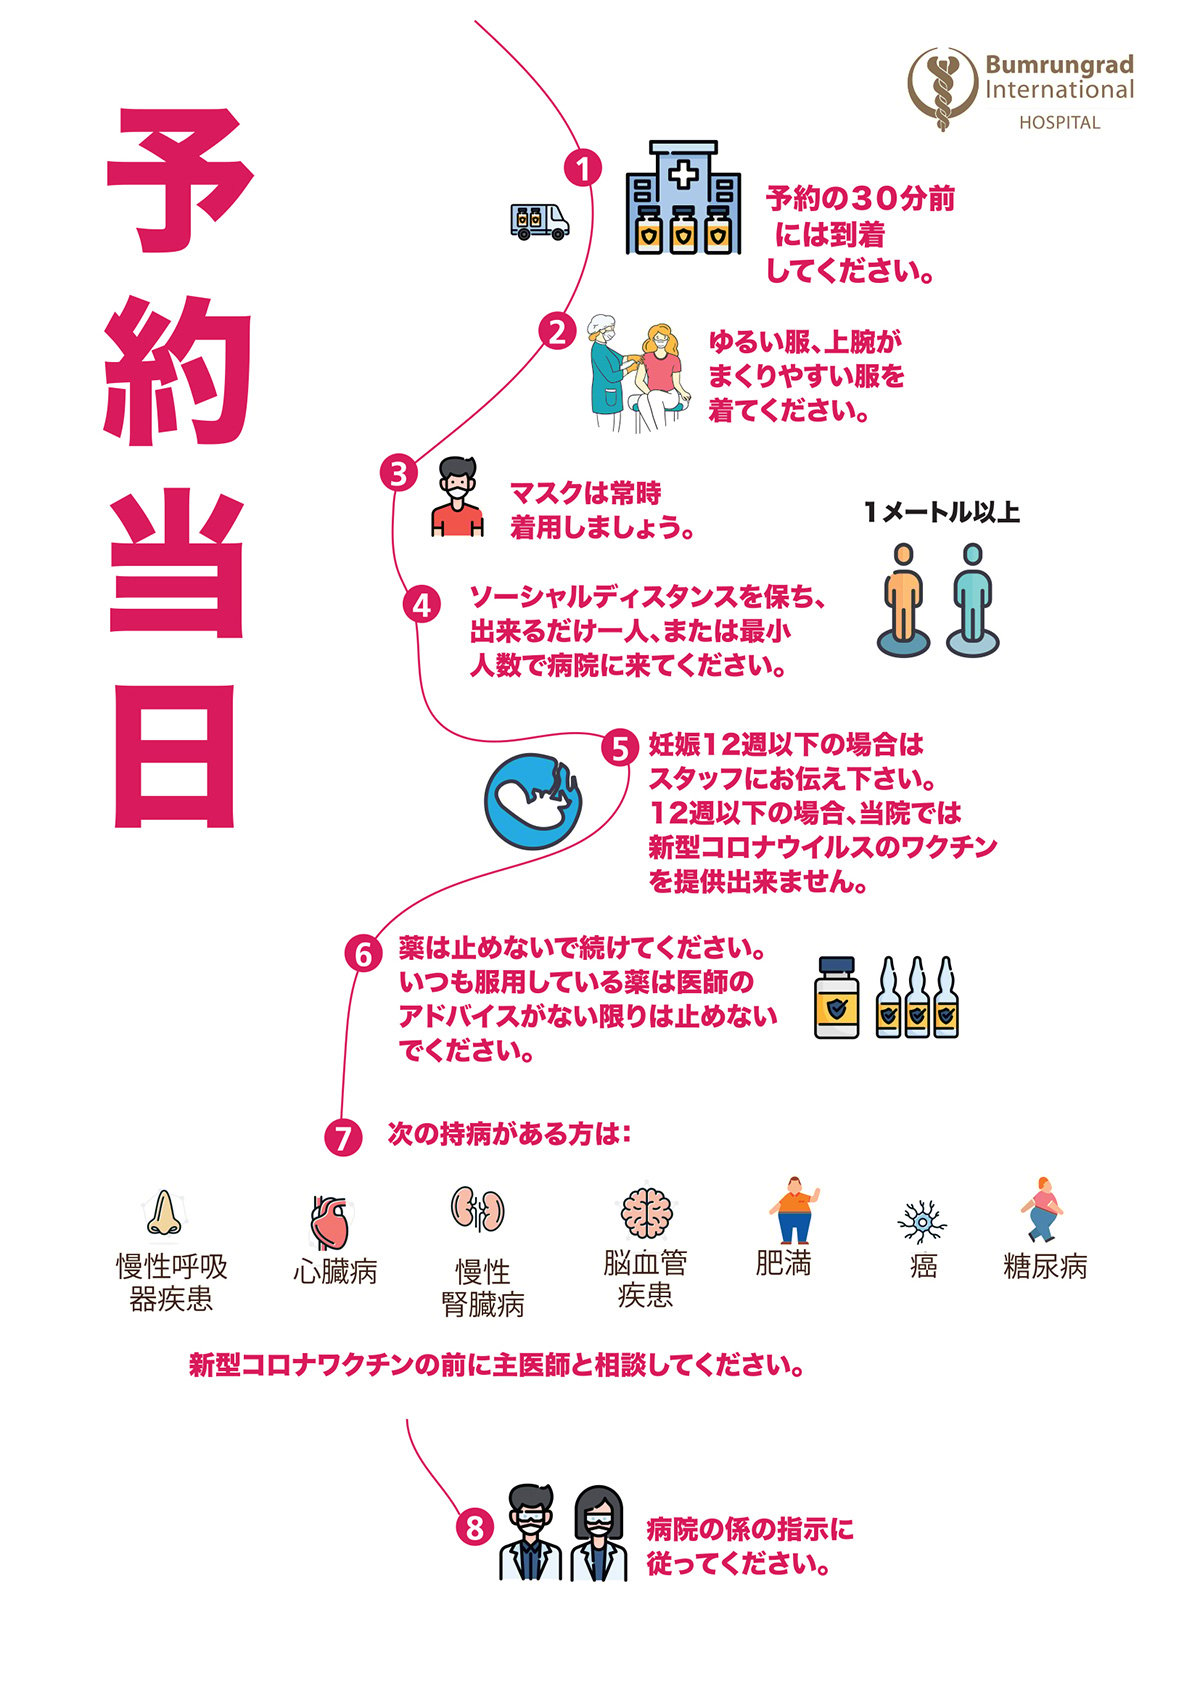 Getting-Your-Covid-19-Vaccination-info_JP-02.jpg